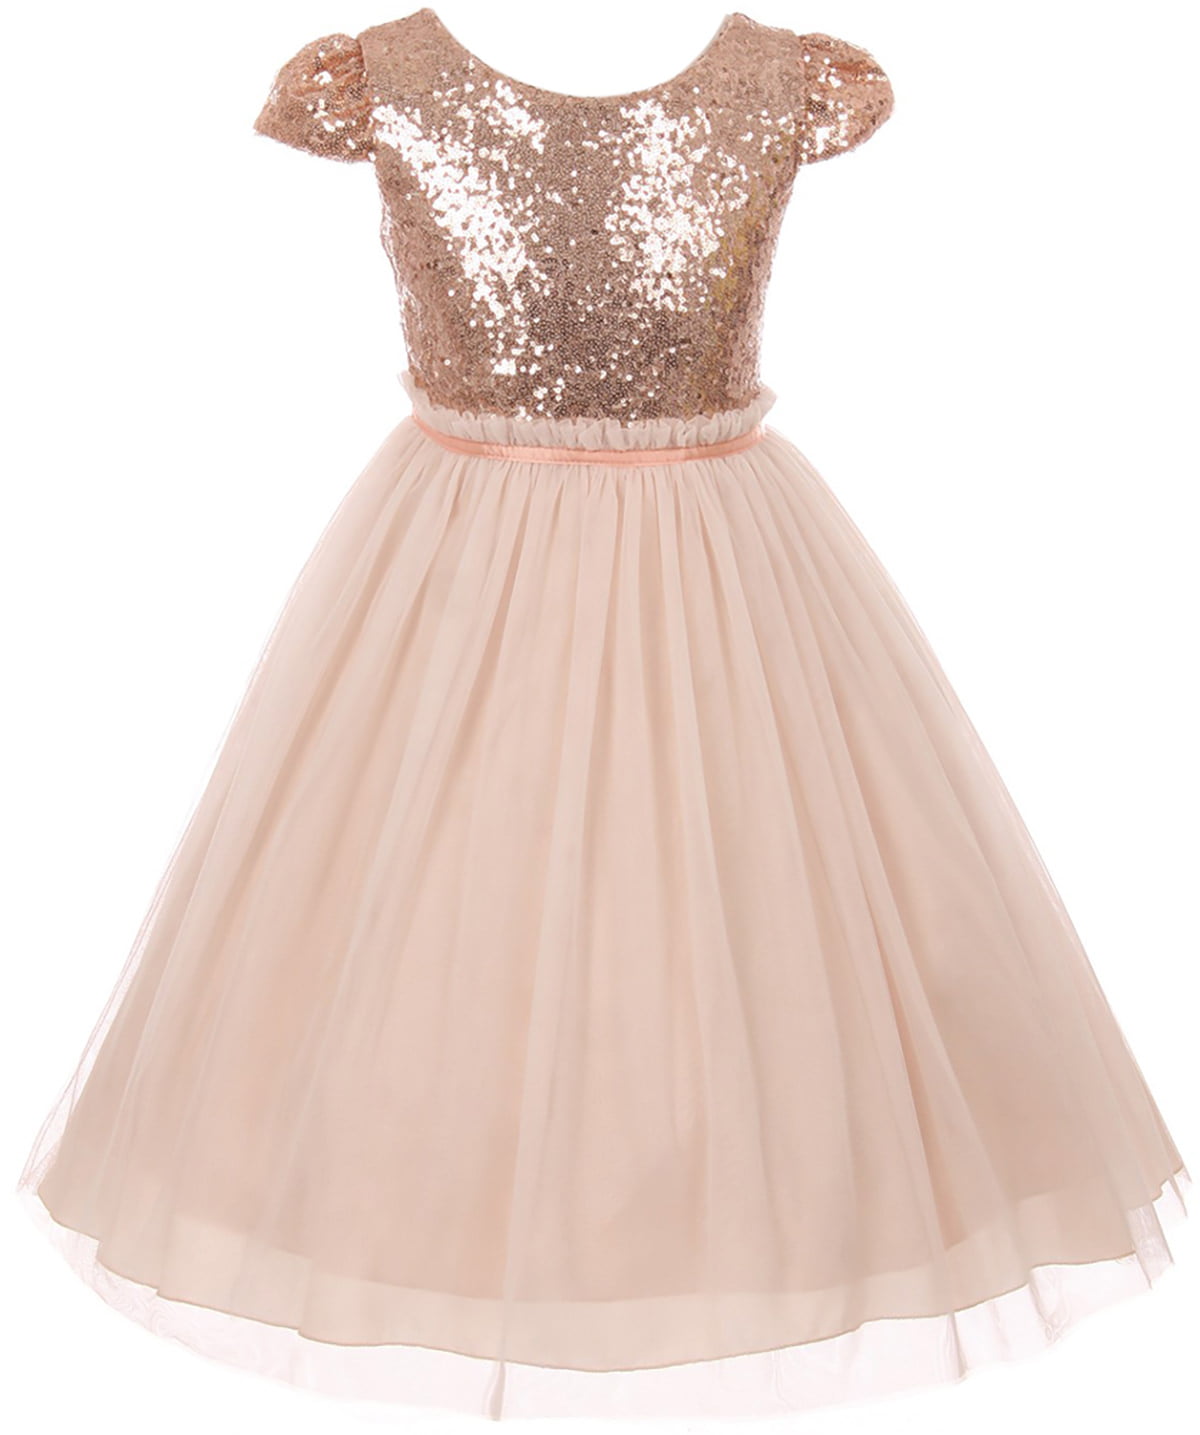 New Flower Girls Lace Blush Dress Pageant Wedding Easter Party Christmas 5036 